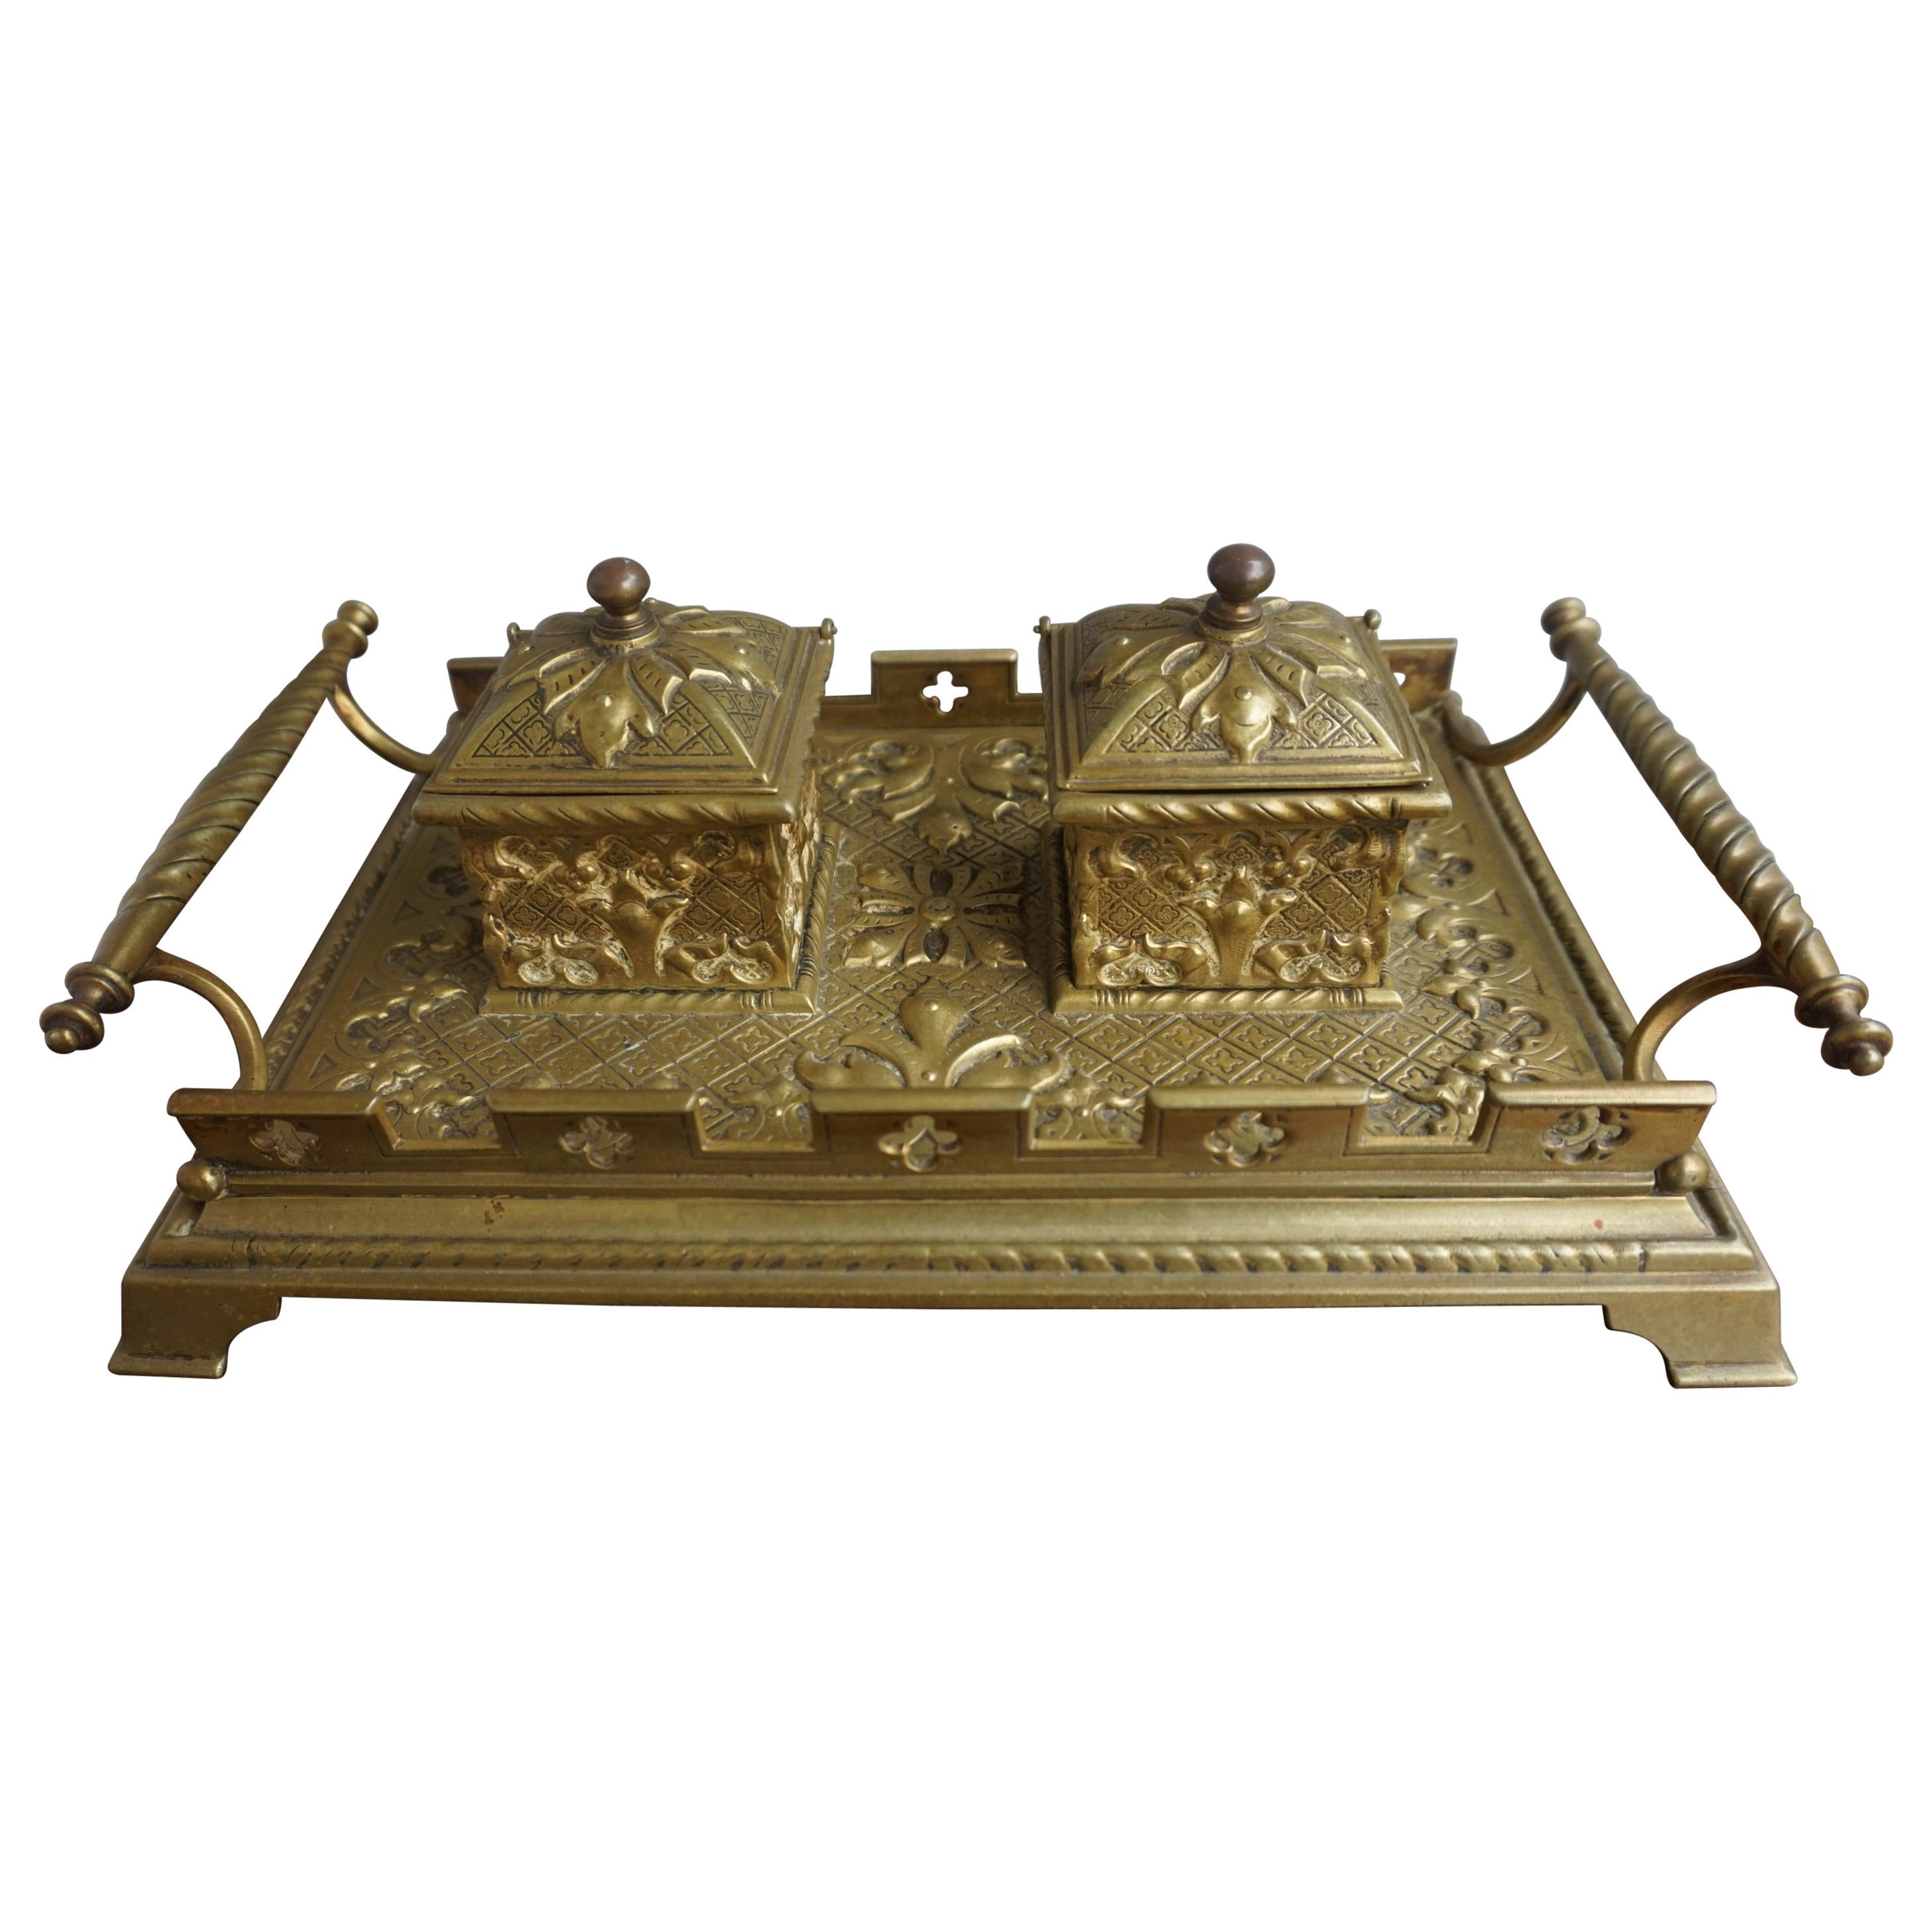 Finest Quality Handcrafted Antique Bronze and Brass Gothic Revival Inkstand For Sale